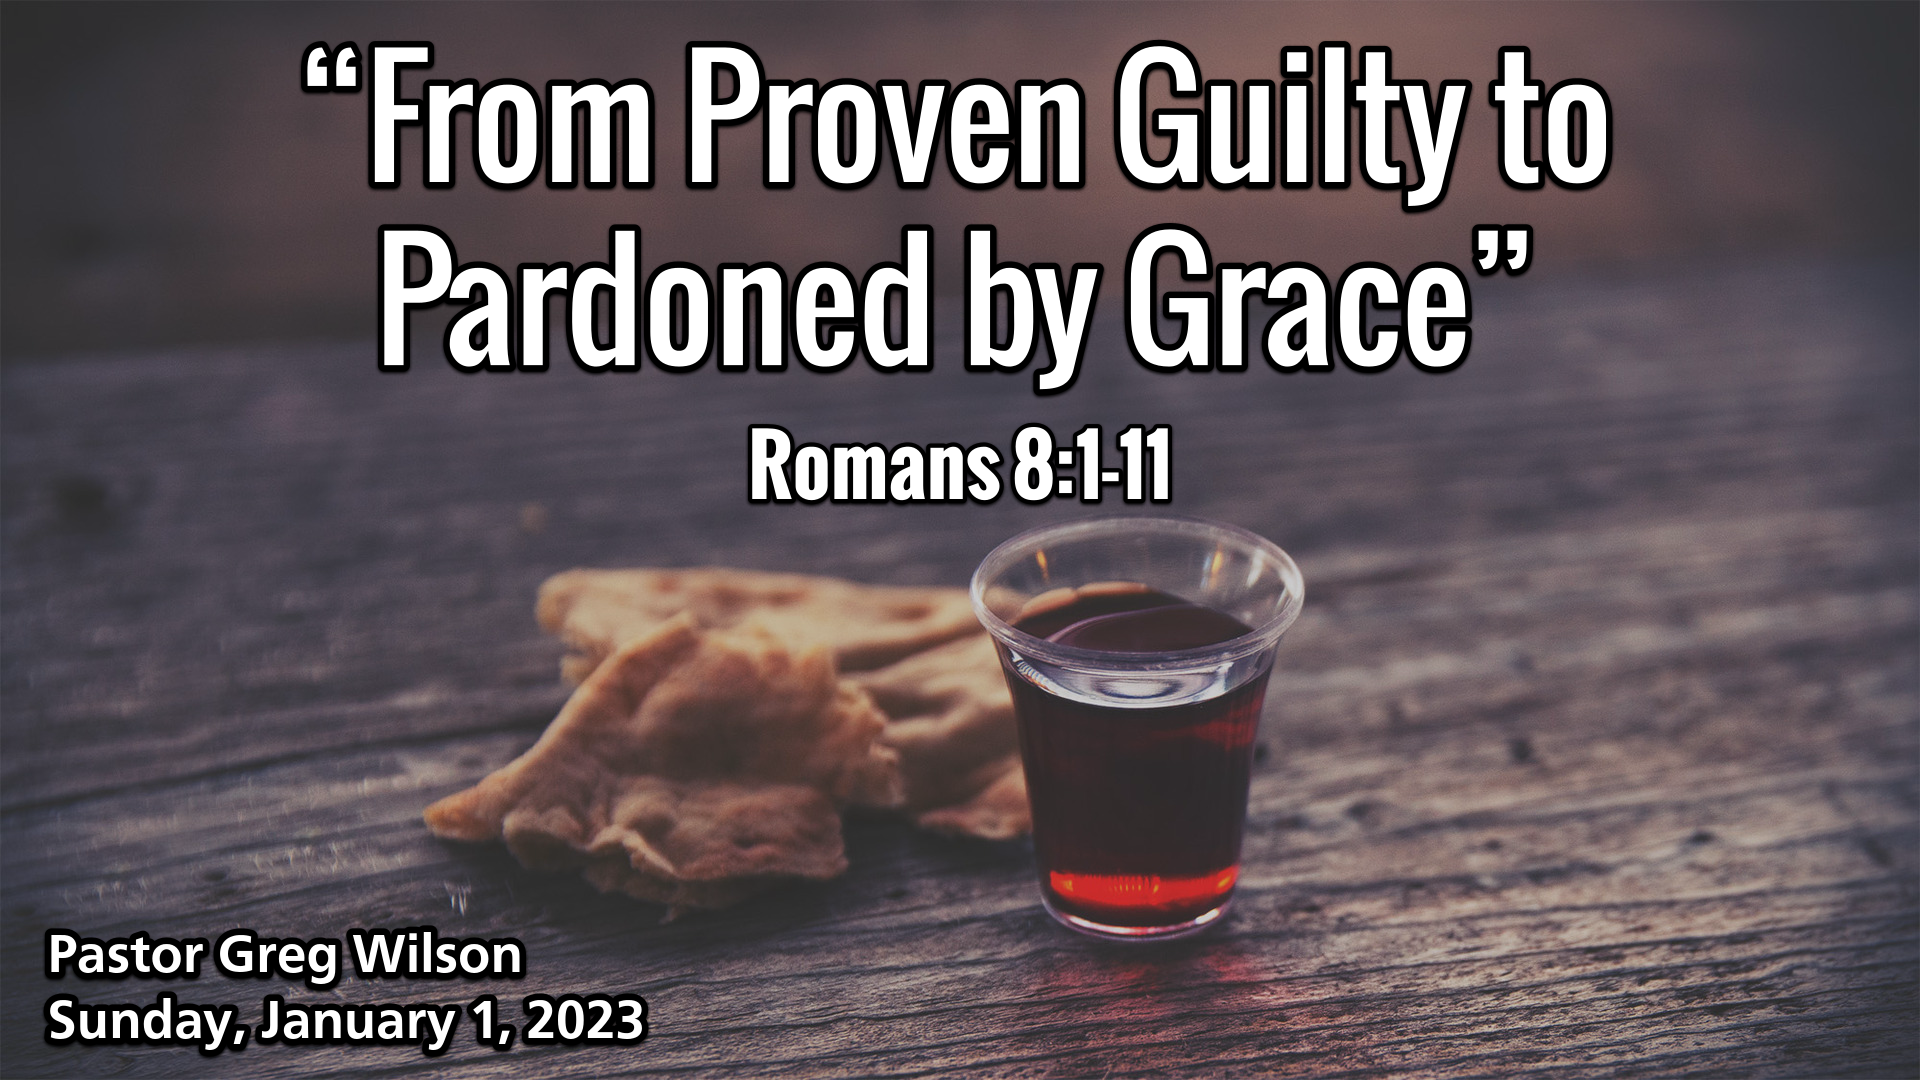 “From Proven Guilty to Pardoned by Grace”